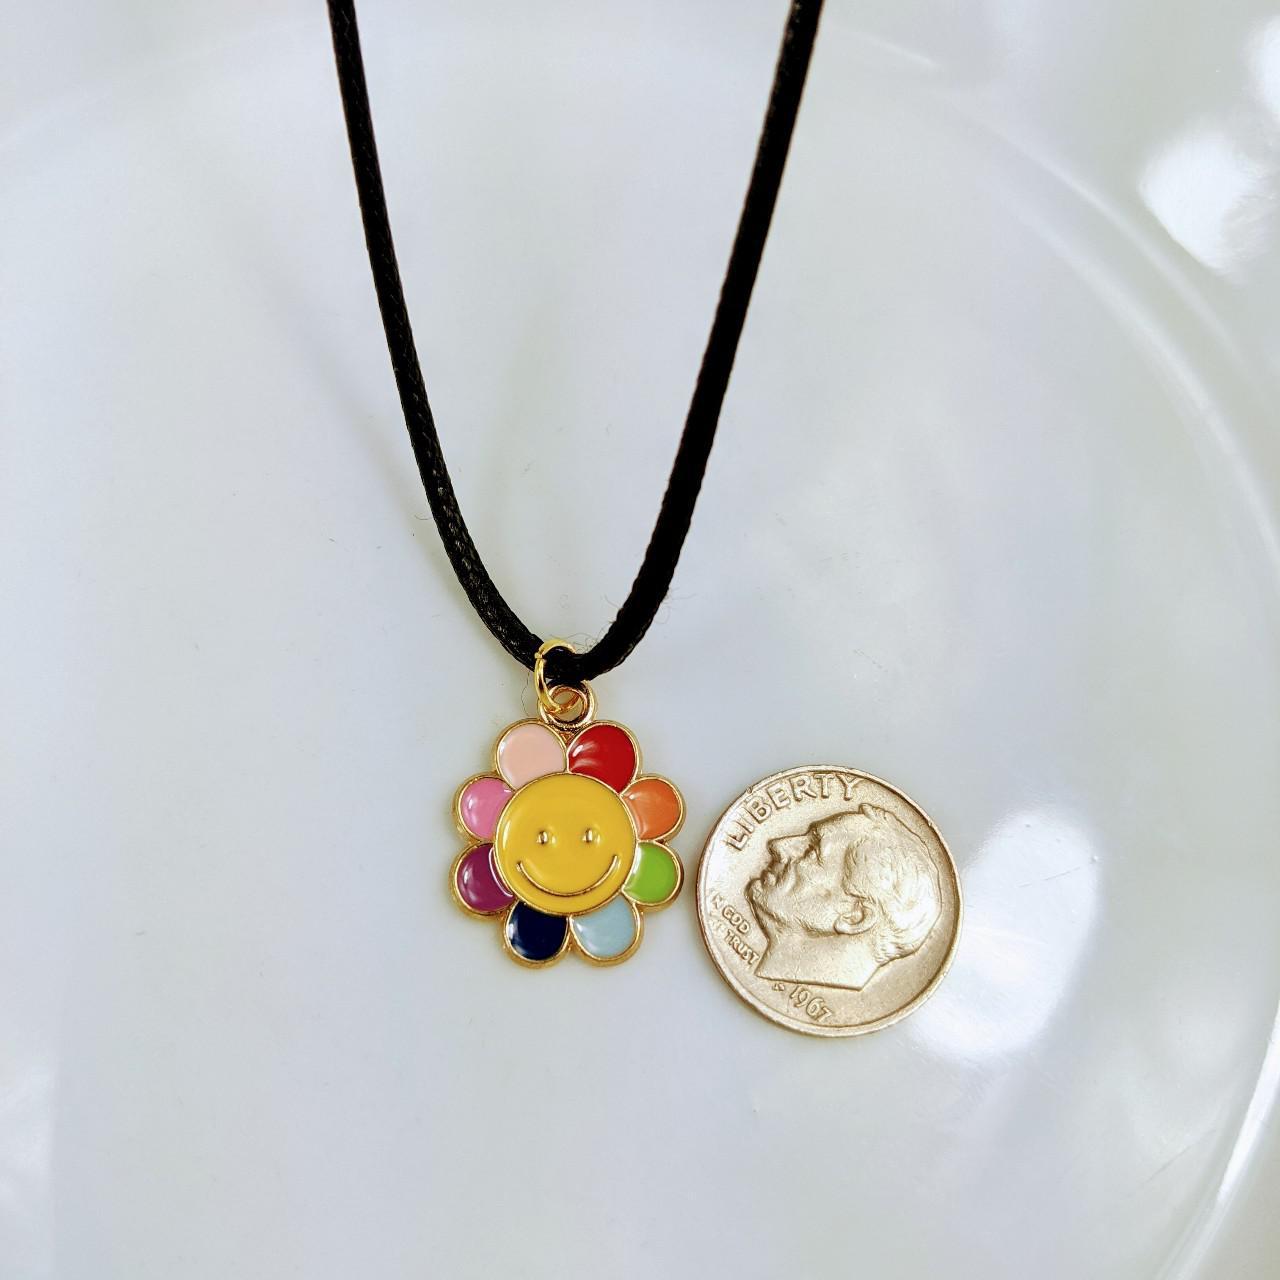 Product Image 2 - Rainbow Flower Face Necklace
Brand new.